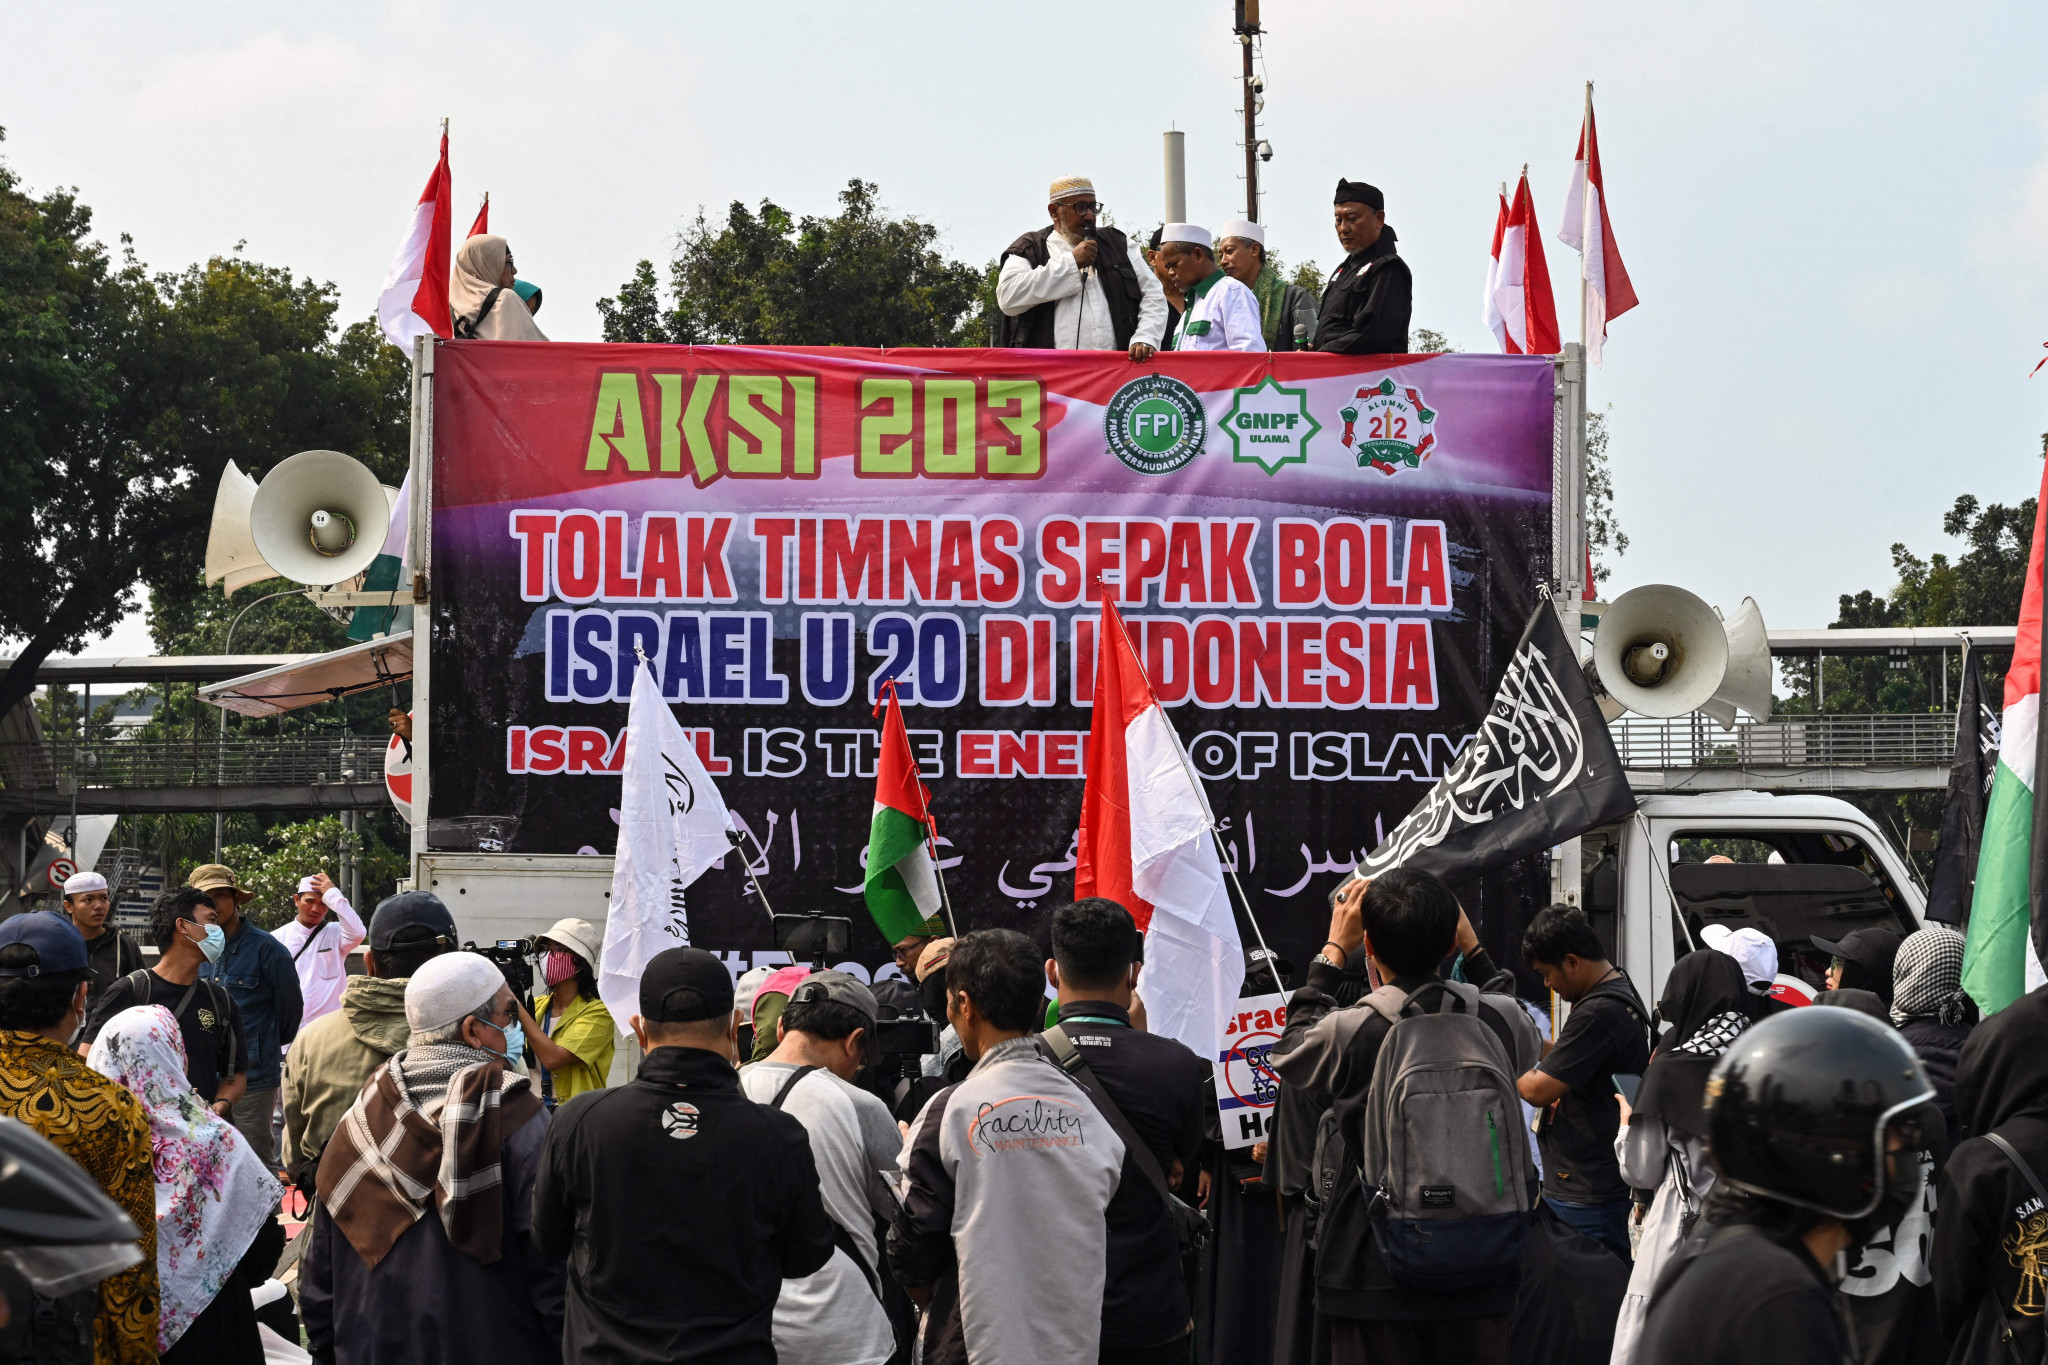 Protests have taken place in Indonesia campaigning against Israel's participation at the tournament before it was taken away from the Asian country ©Getty Images